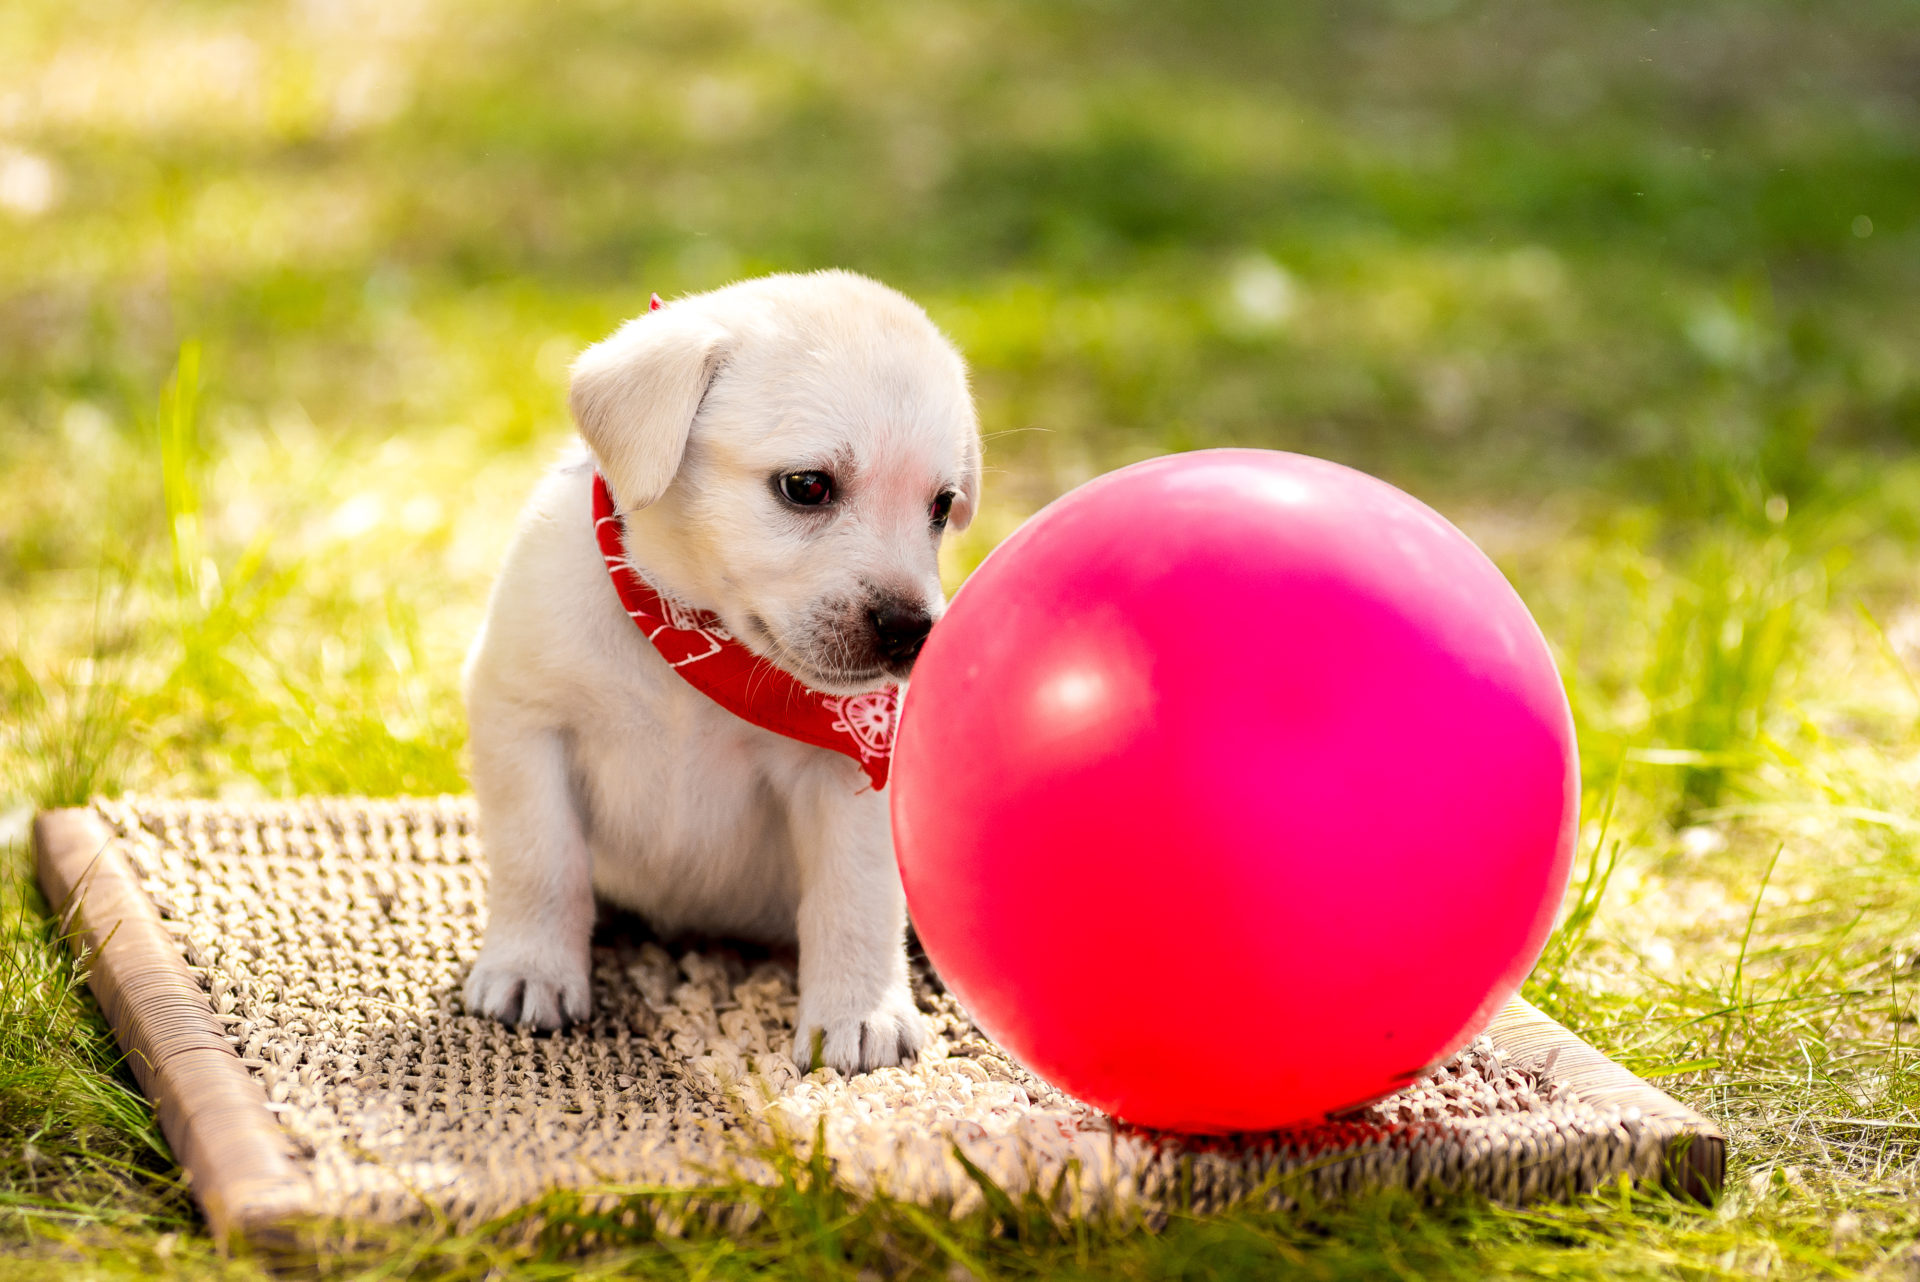 Labrador puppy with a ball. Beautiful dog puppy Labrador Retriever playing with rubber ball on grass